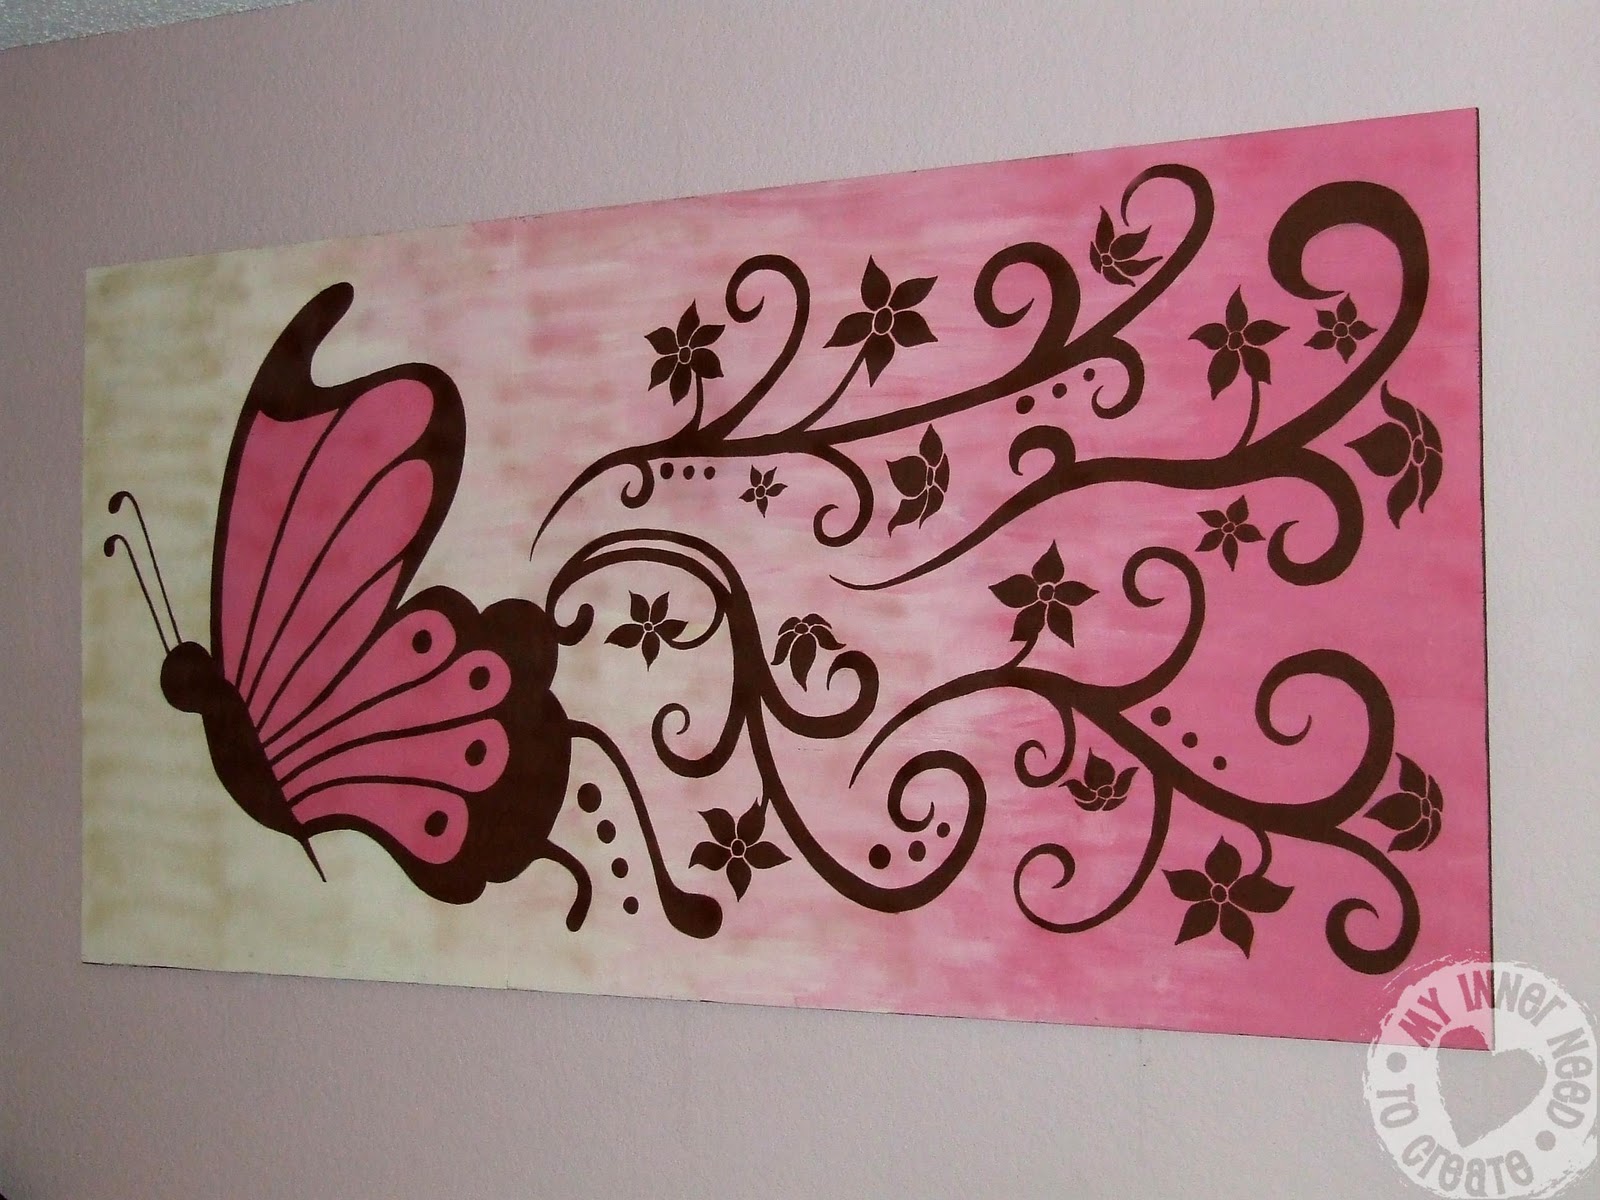 cool simple cake designs And there you have it! A huge painted mural, cheaper than a huge 